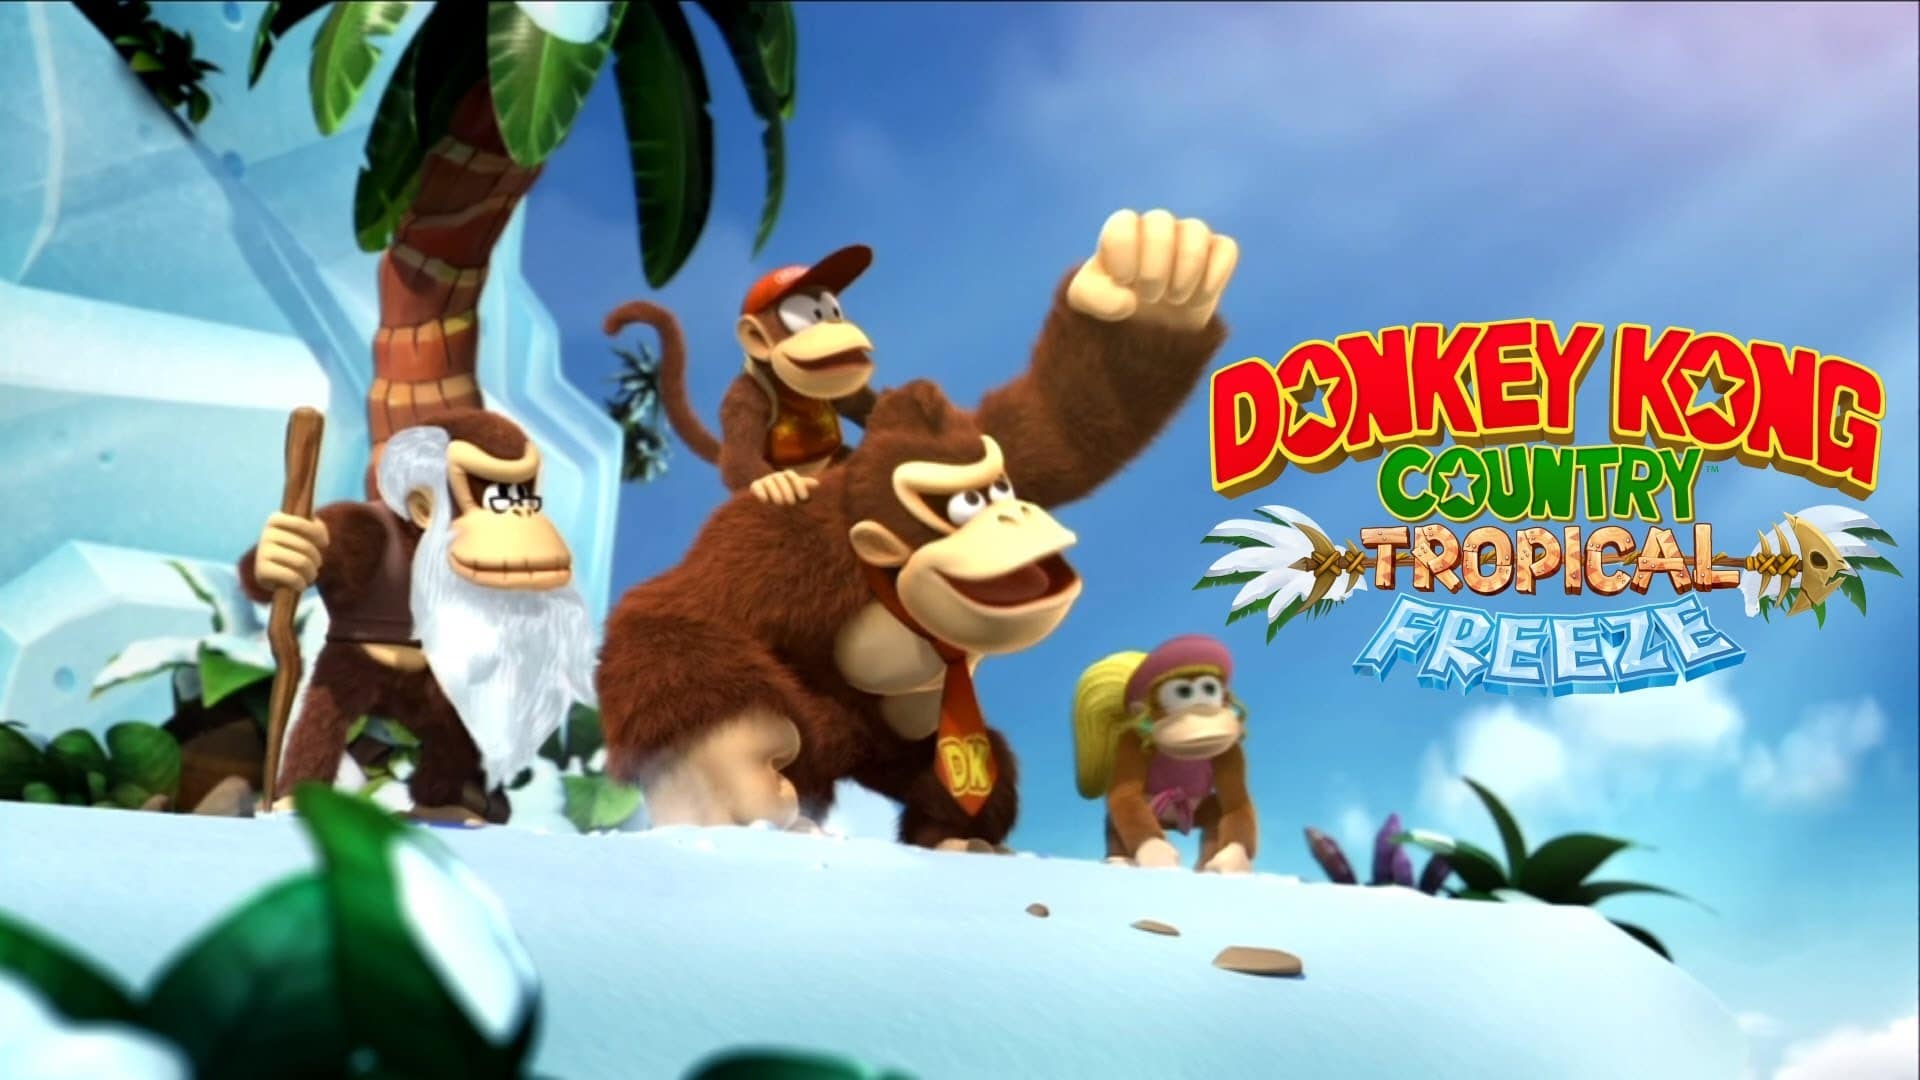 Donkey Kong Country: Tropical Freeze launch trailer